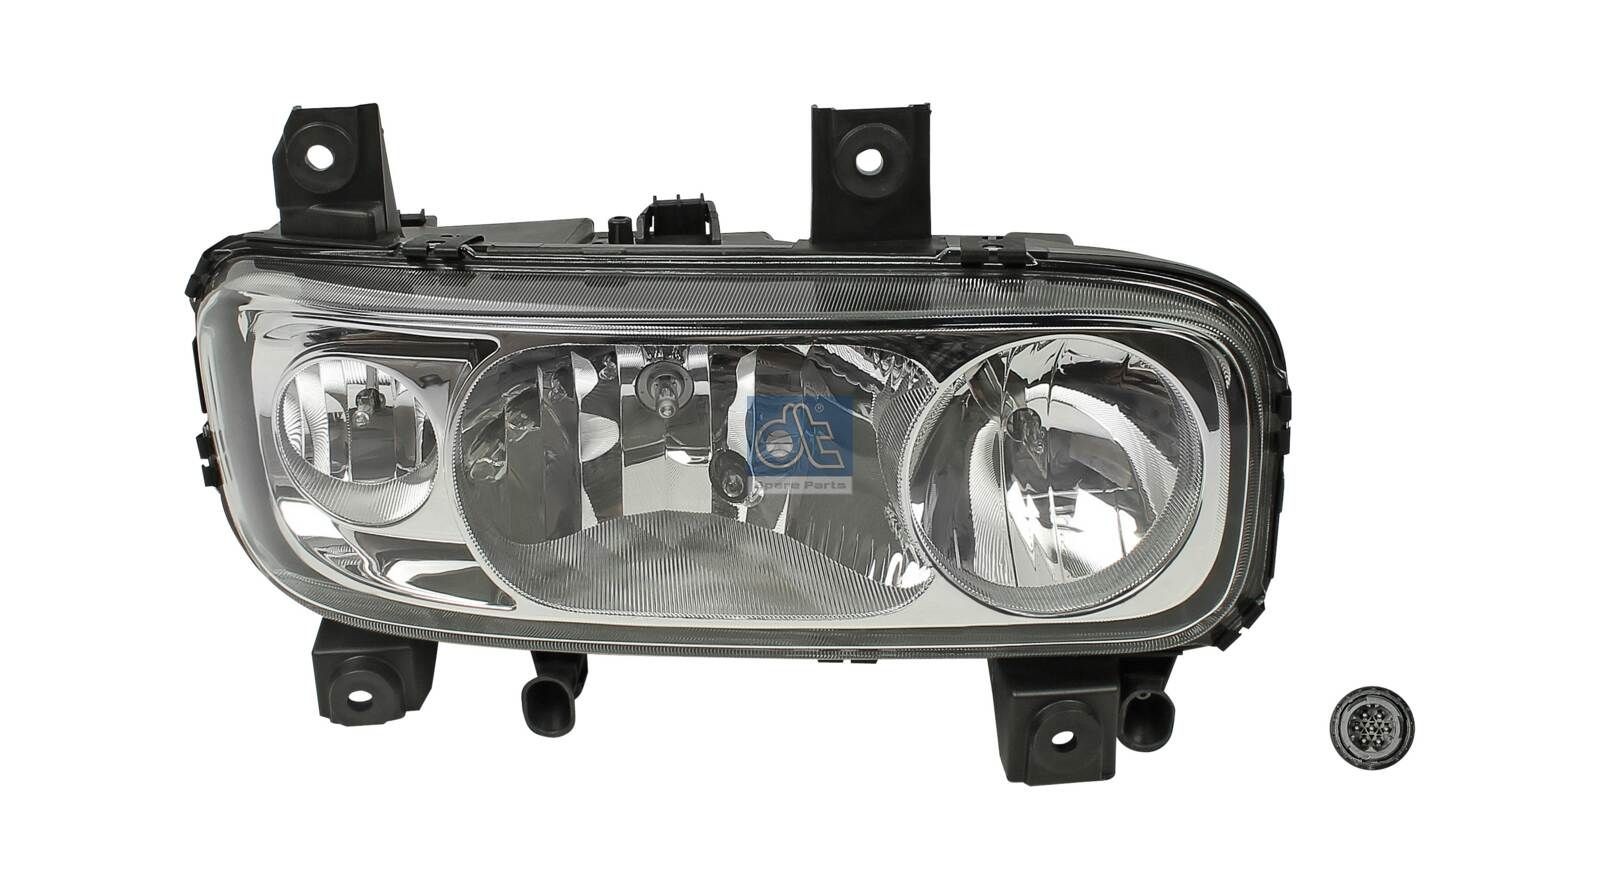 DT Spare Parts 4.68766 Headlight A 973 820 29 61